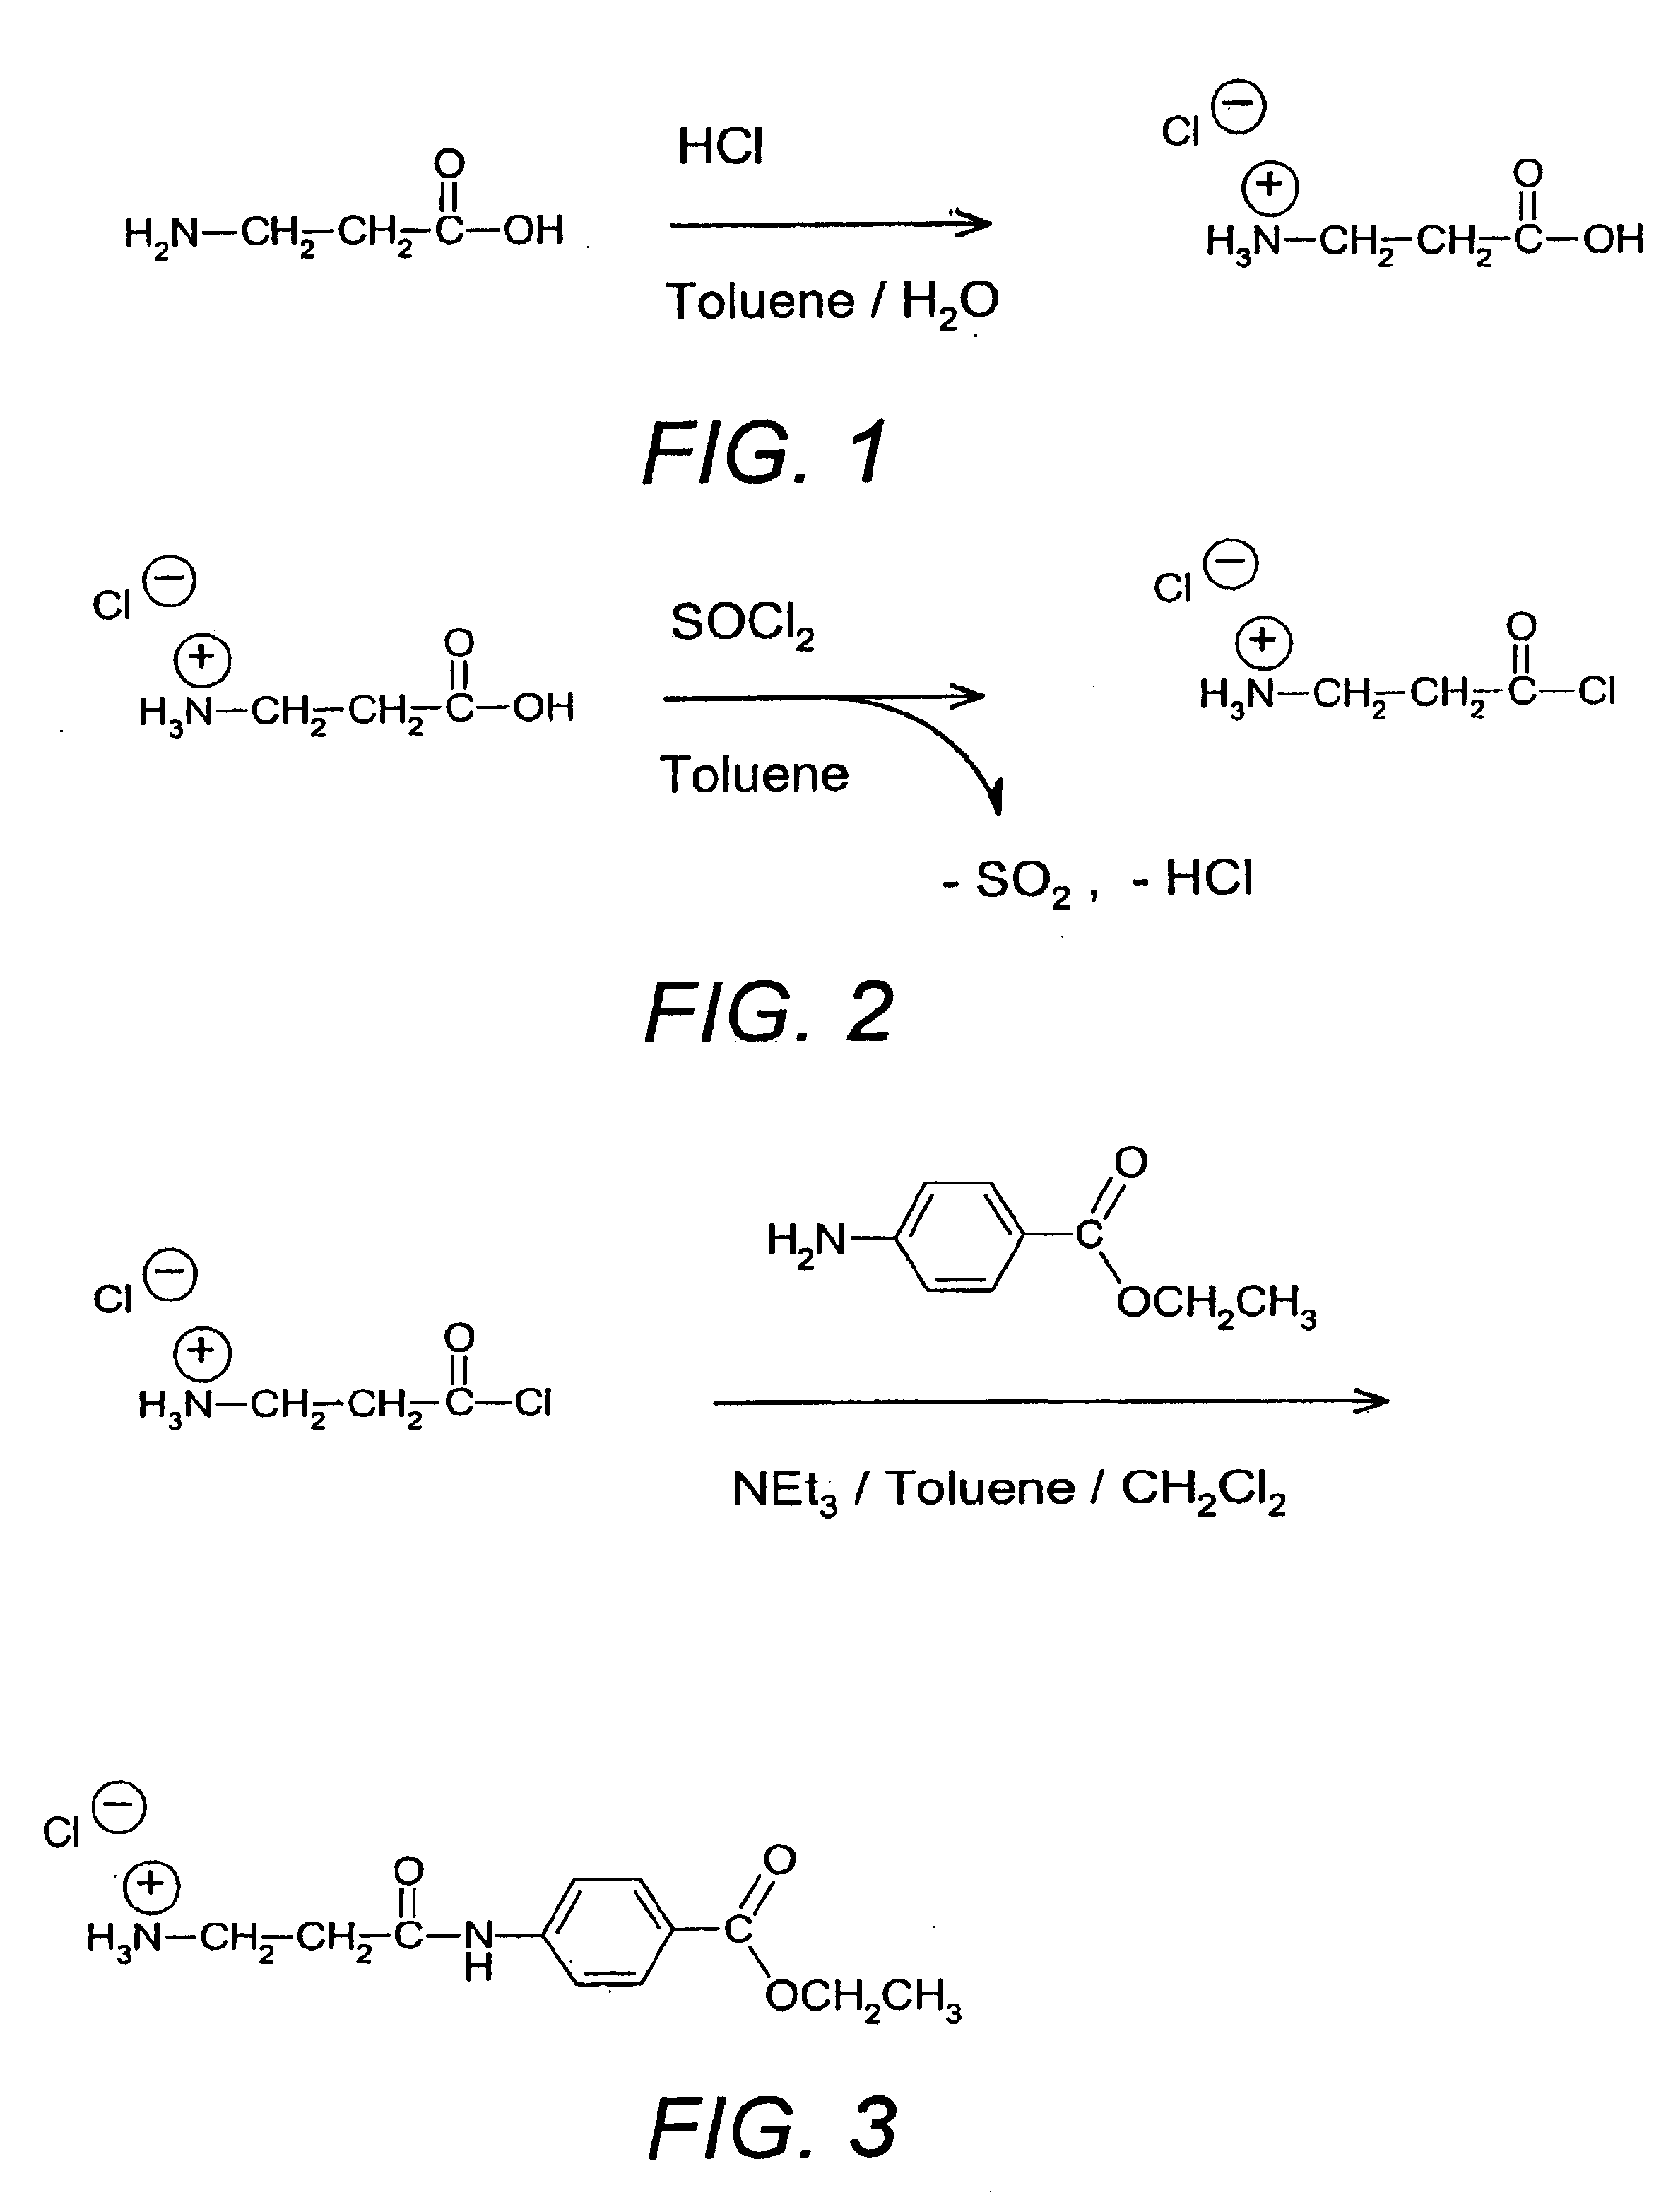 Methods of synthesis for 9-substituted hypoxanthine derivatives